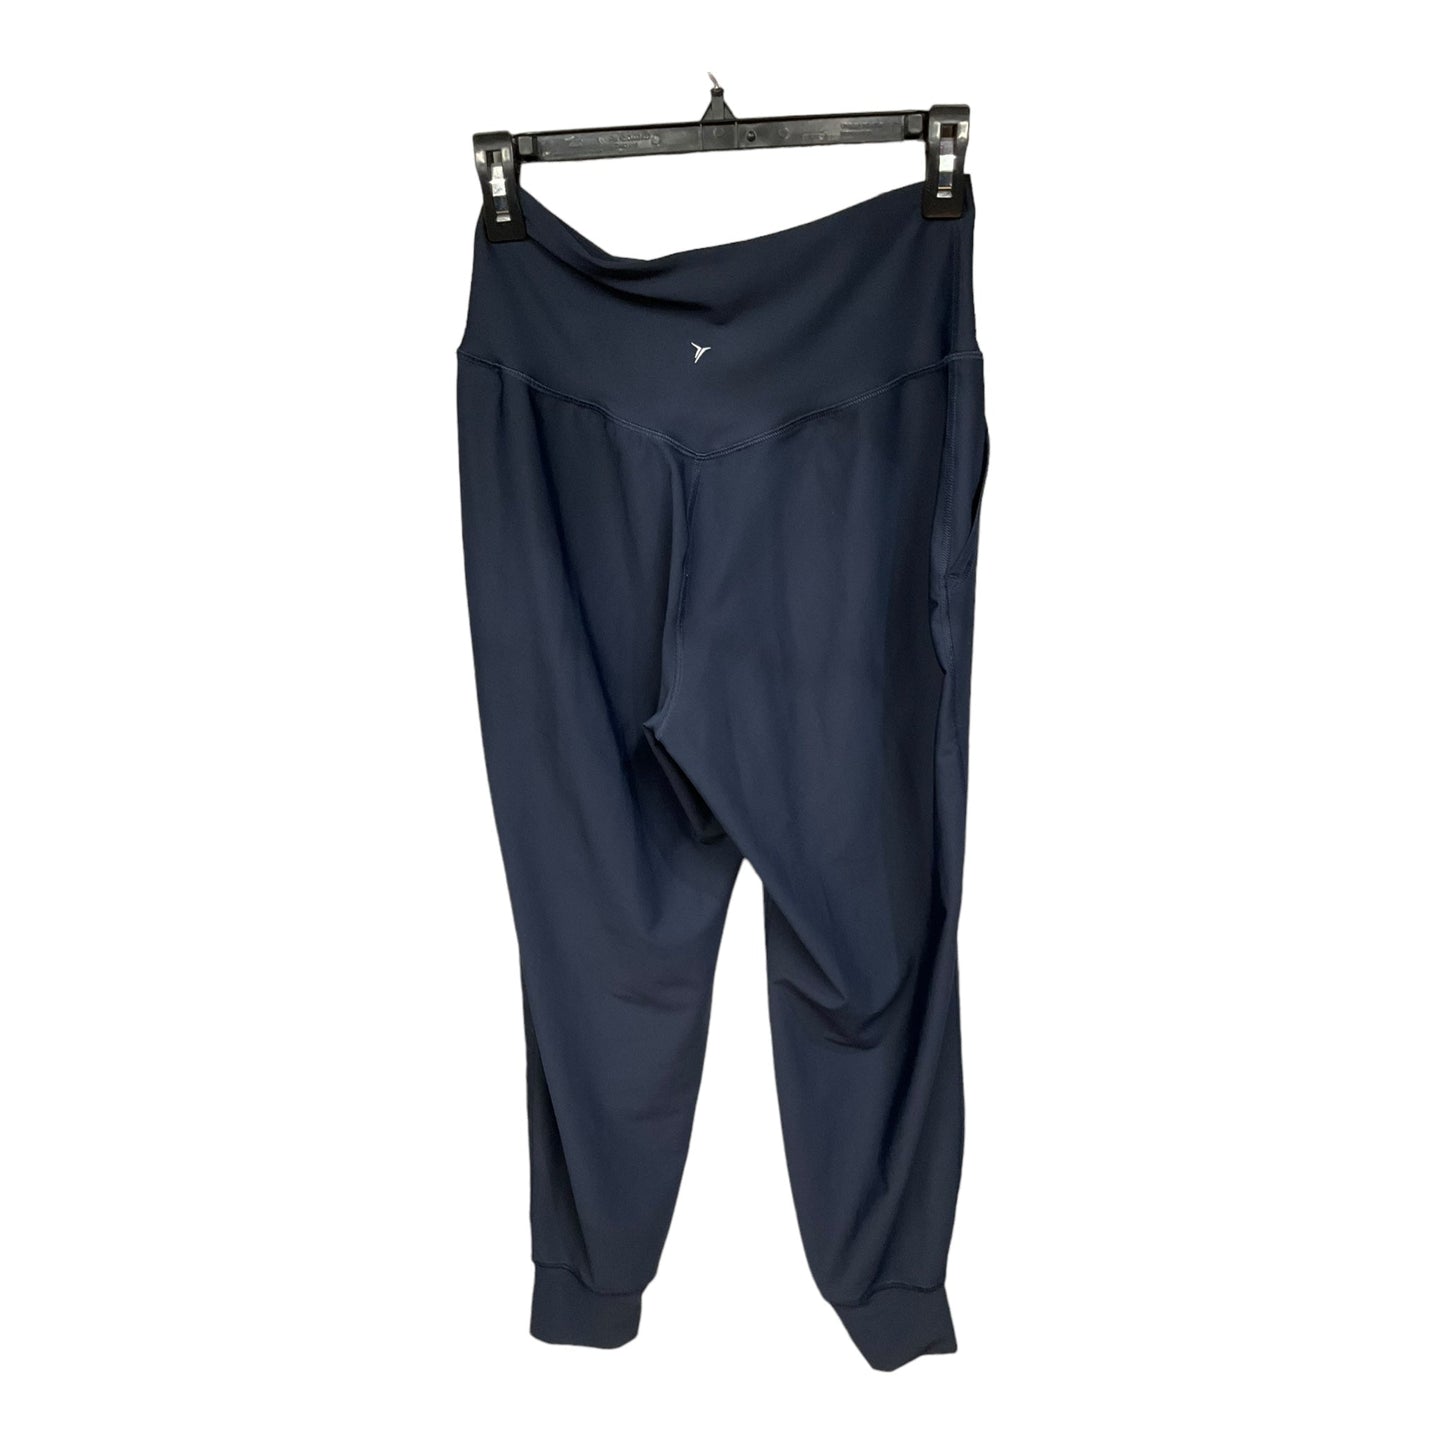 Navy Athletic Pants Old Navy, Size M